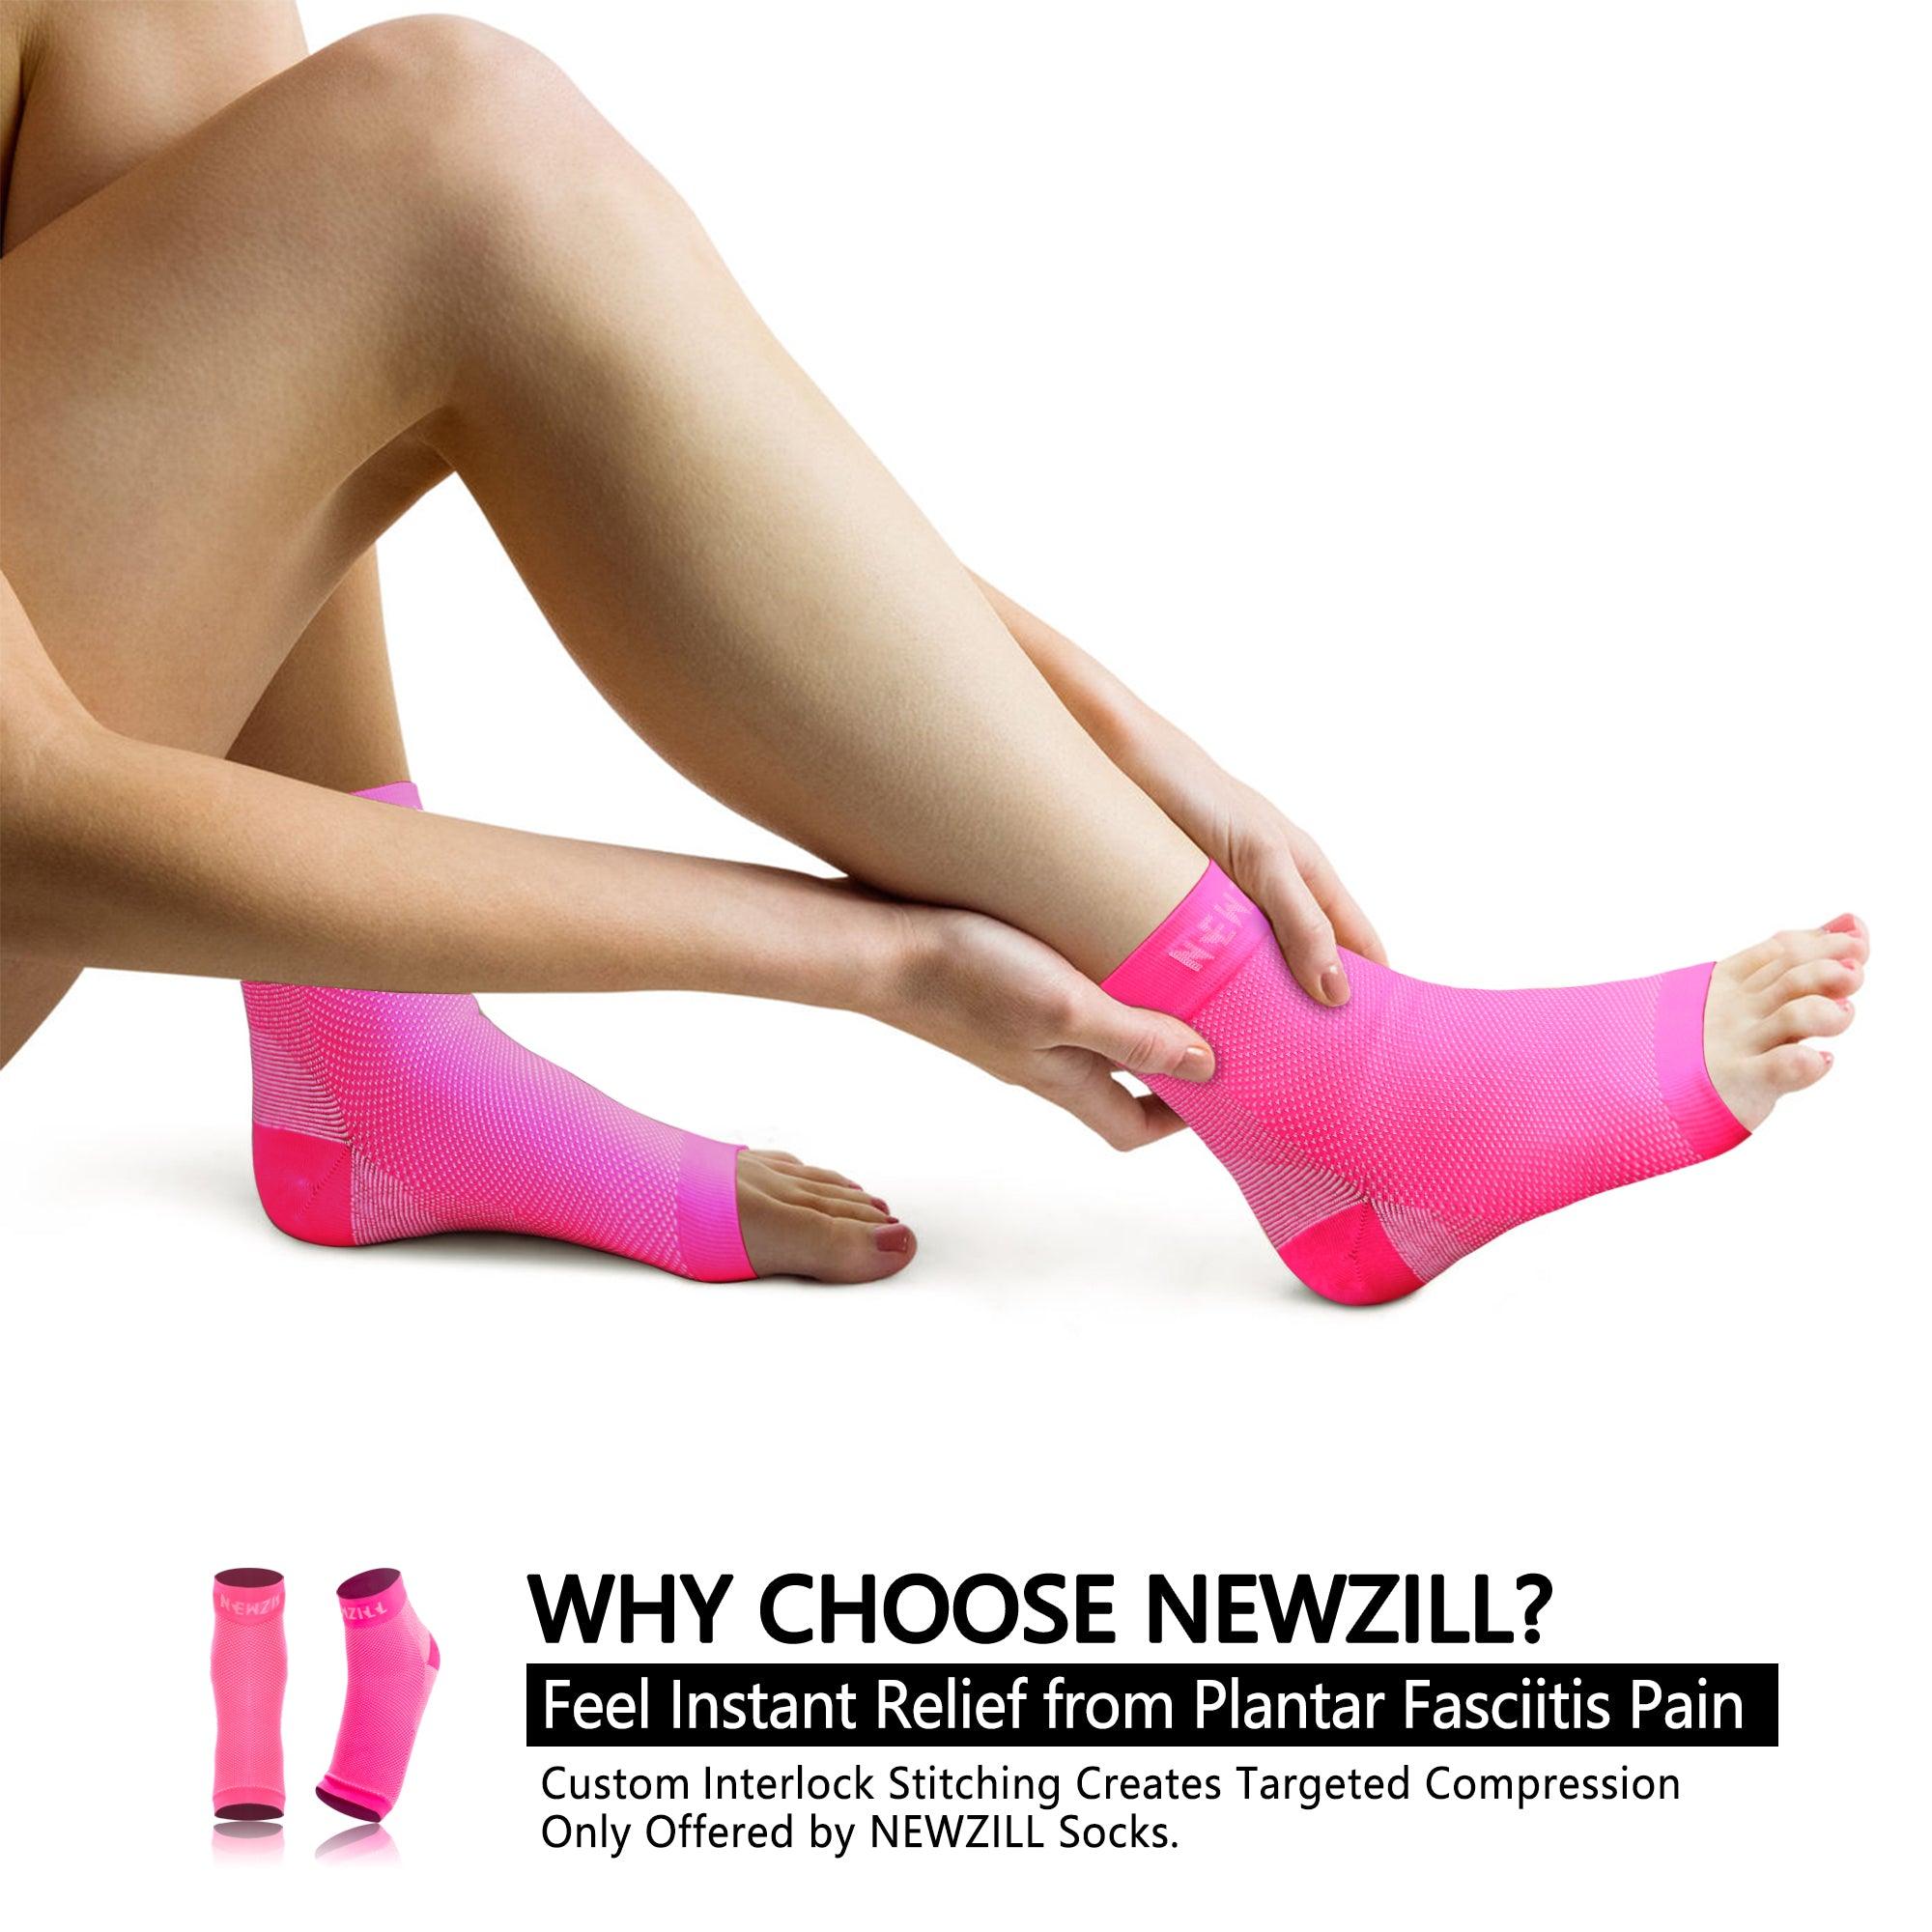  NV-X Sport Leg Sleeves 15-20MMHG Compression Enhanced  Performance and Protection, Acid Pink, Small : Health & Household